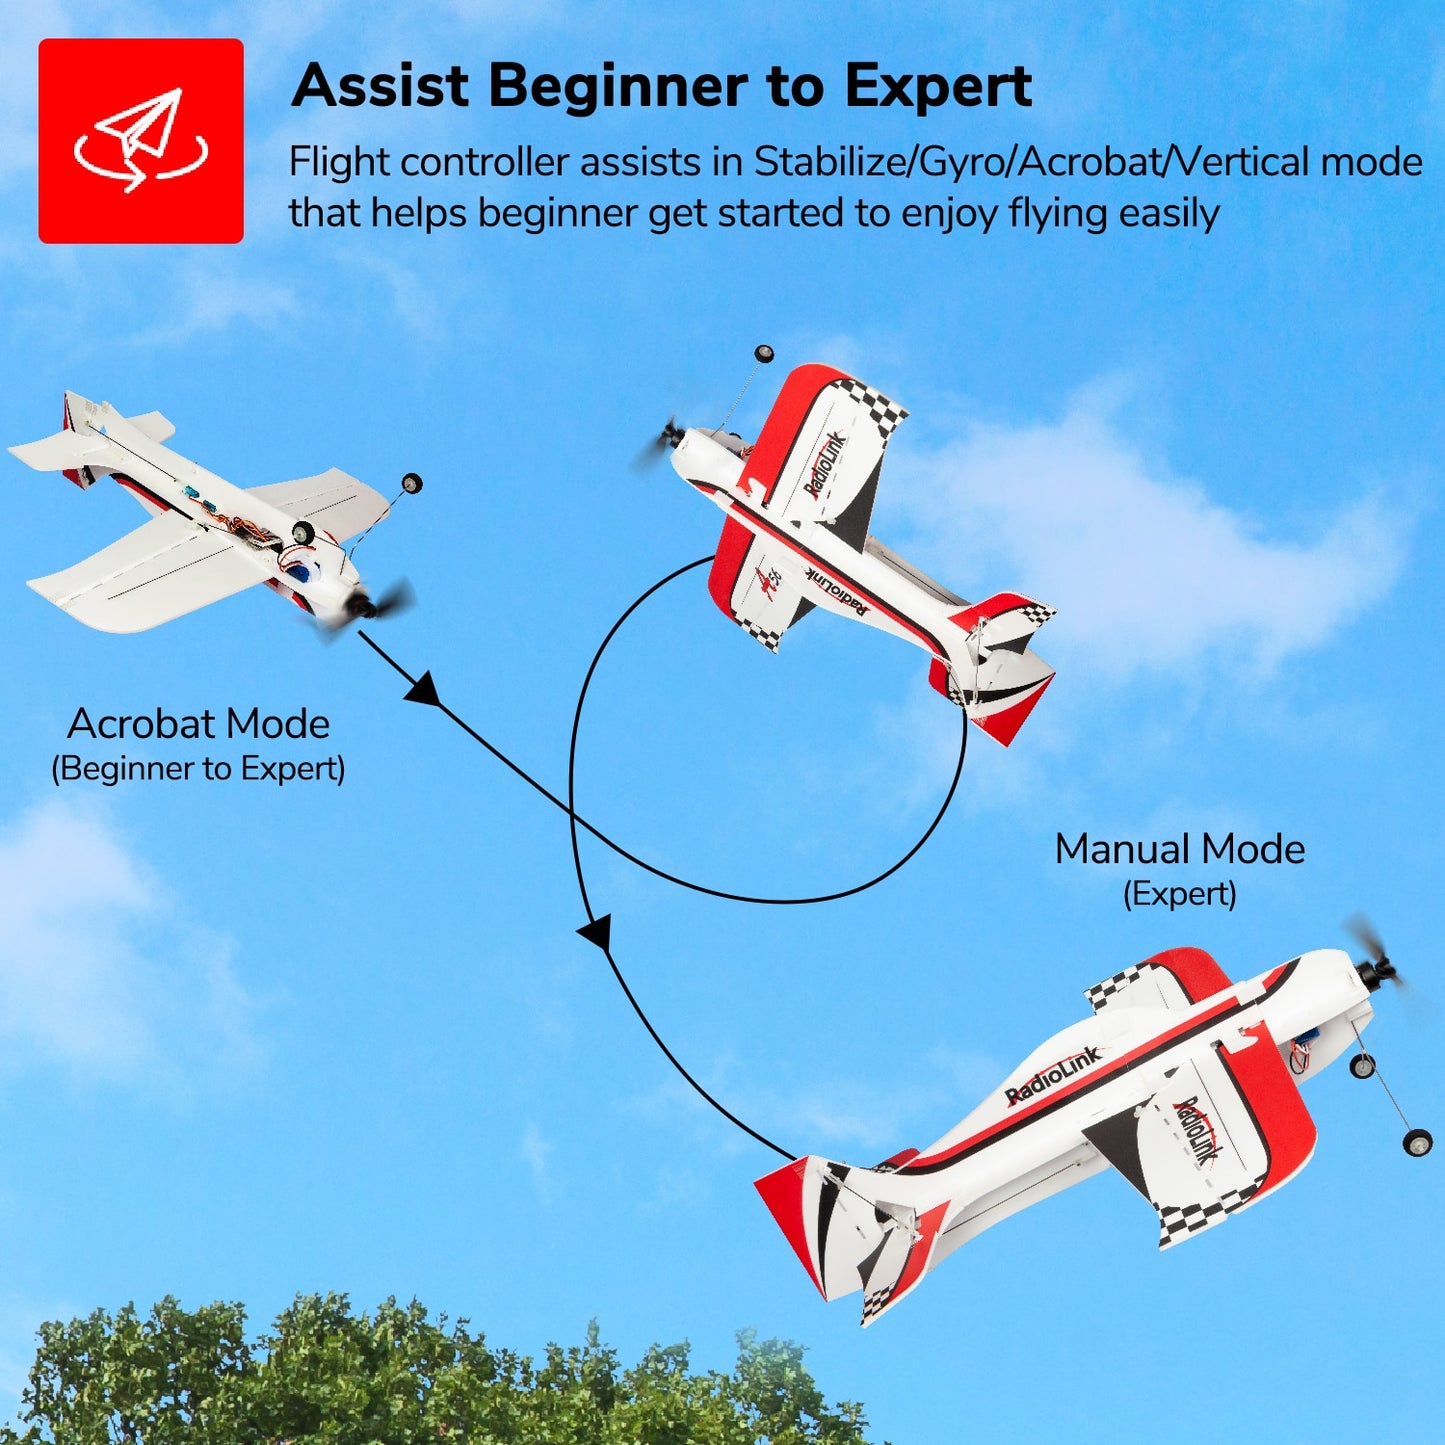 Assist Beginner to Expert Flight controller assists in Stabilize/Gyro